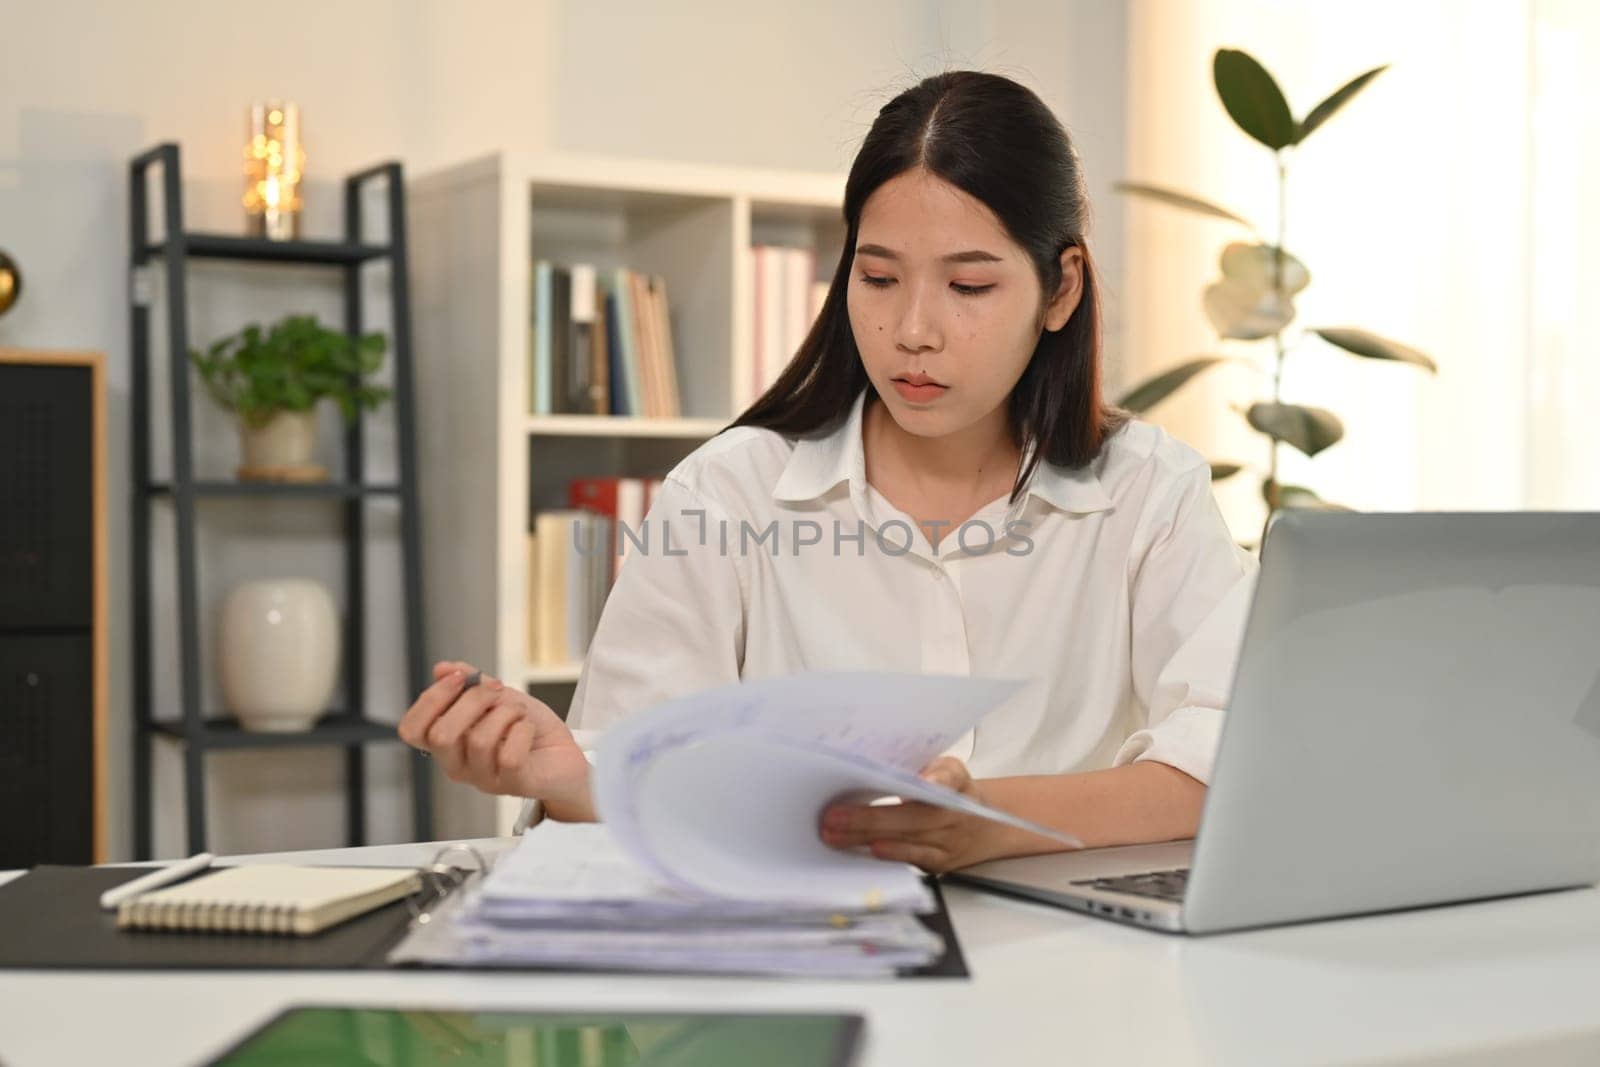 Concentrated businesswoman siting in front of laptop computer at working desk and checking marketing reports.